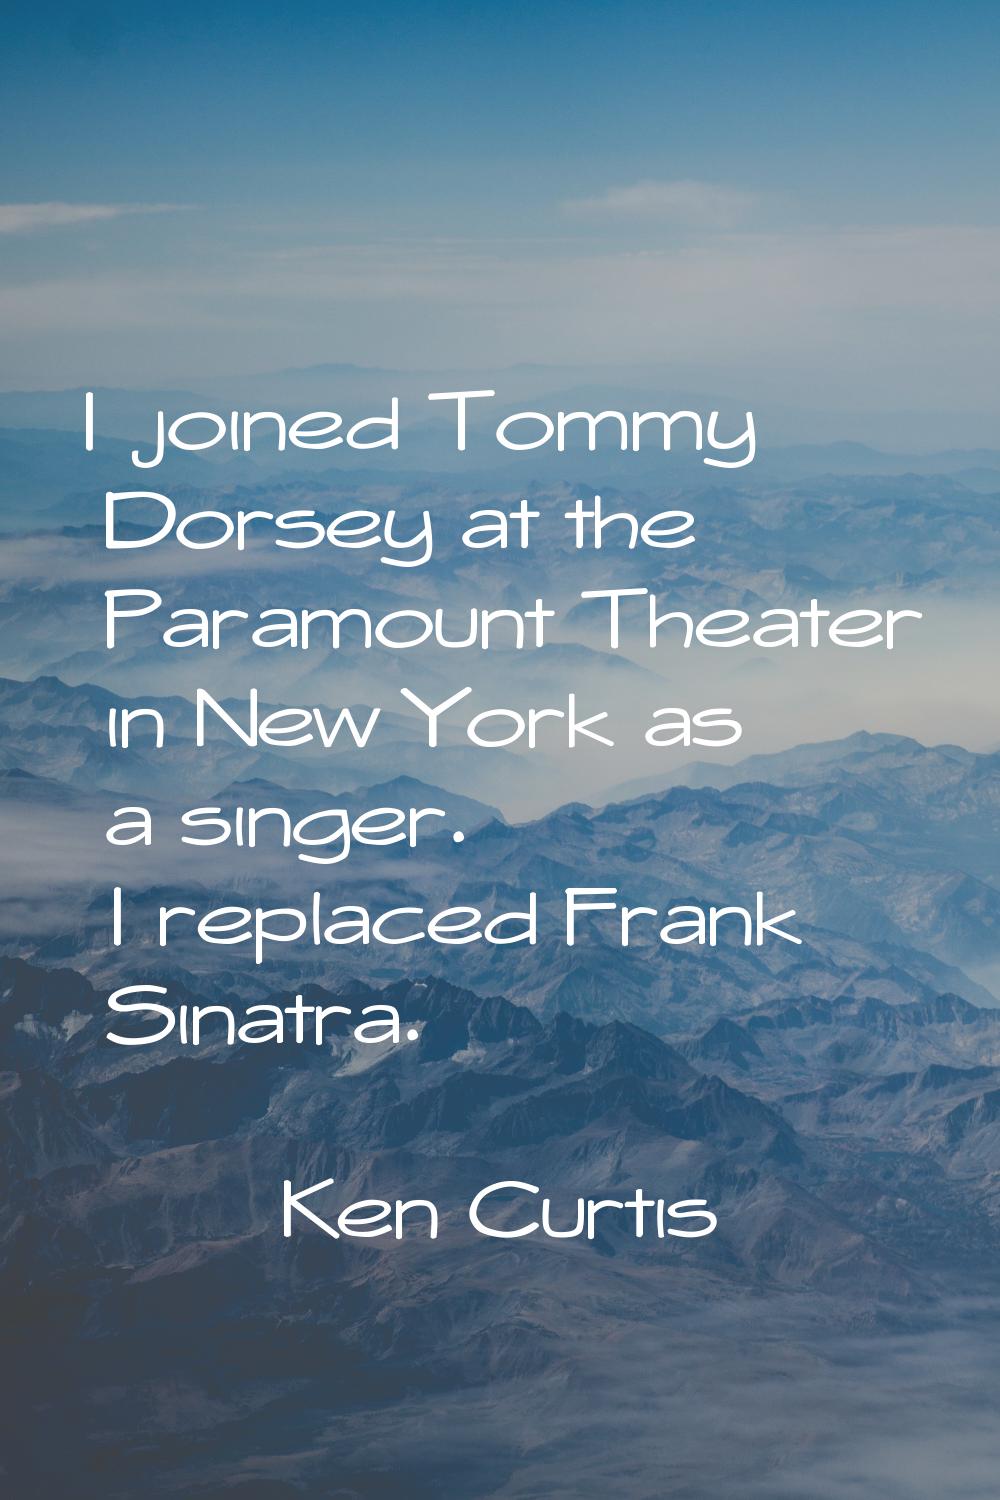 I joined Tommy Dorsey at the Paramount Theater in New York as a singer. I replaced Frank Sinatra.